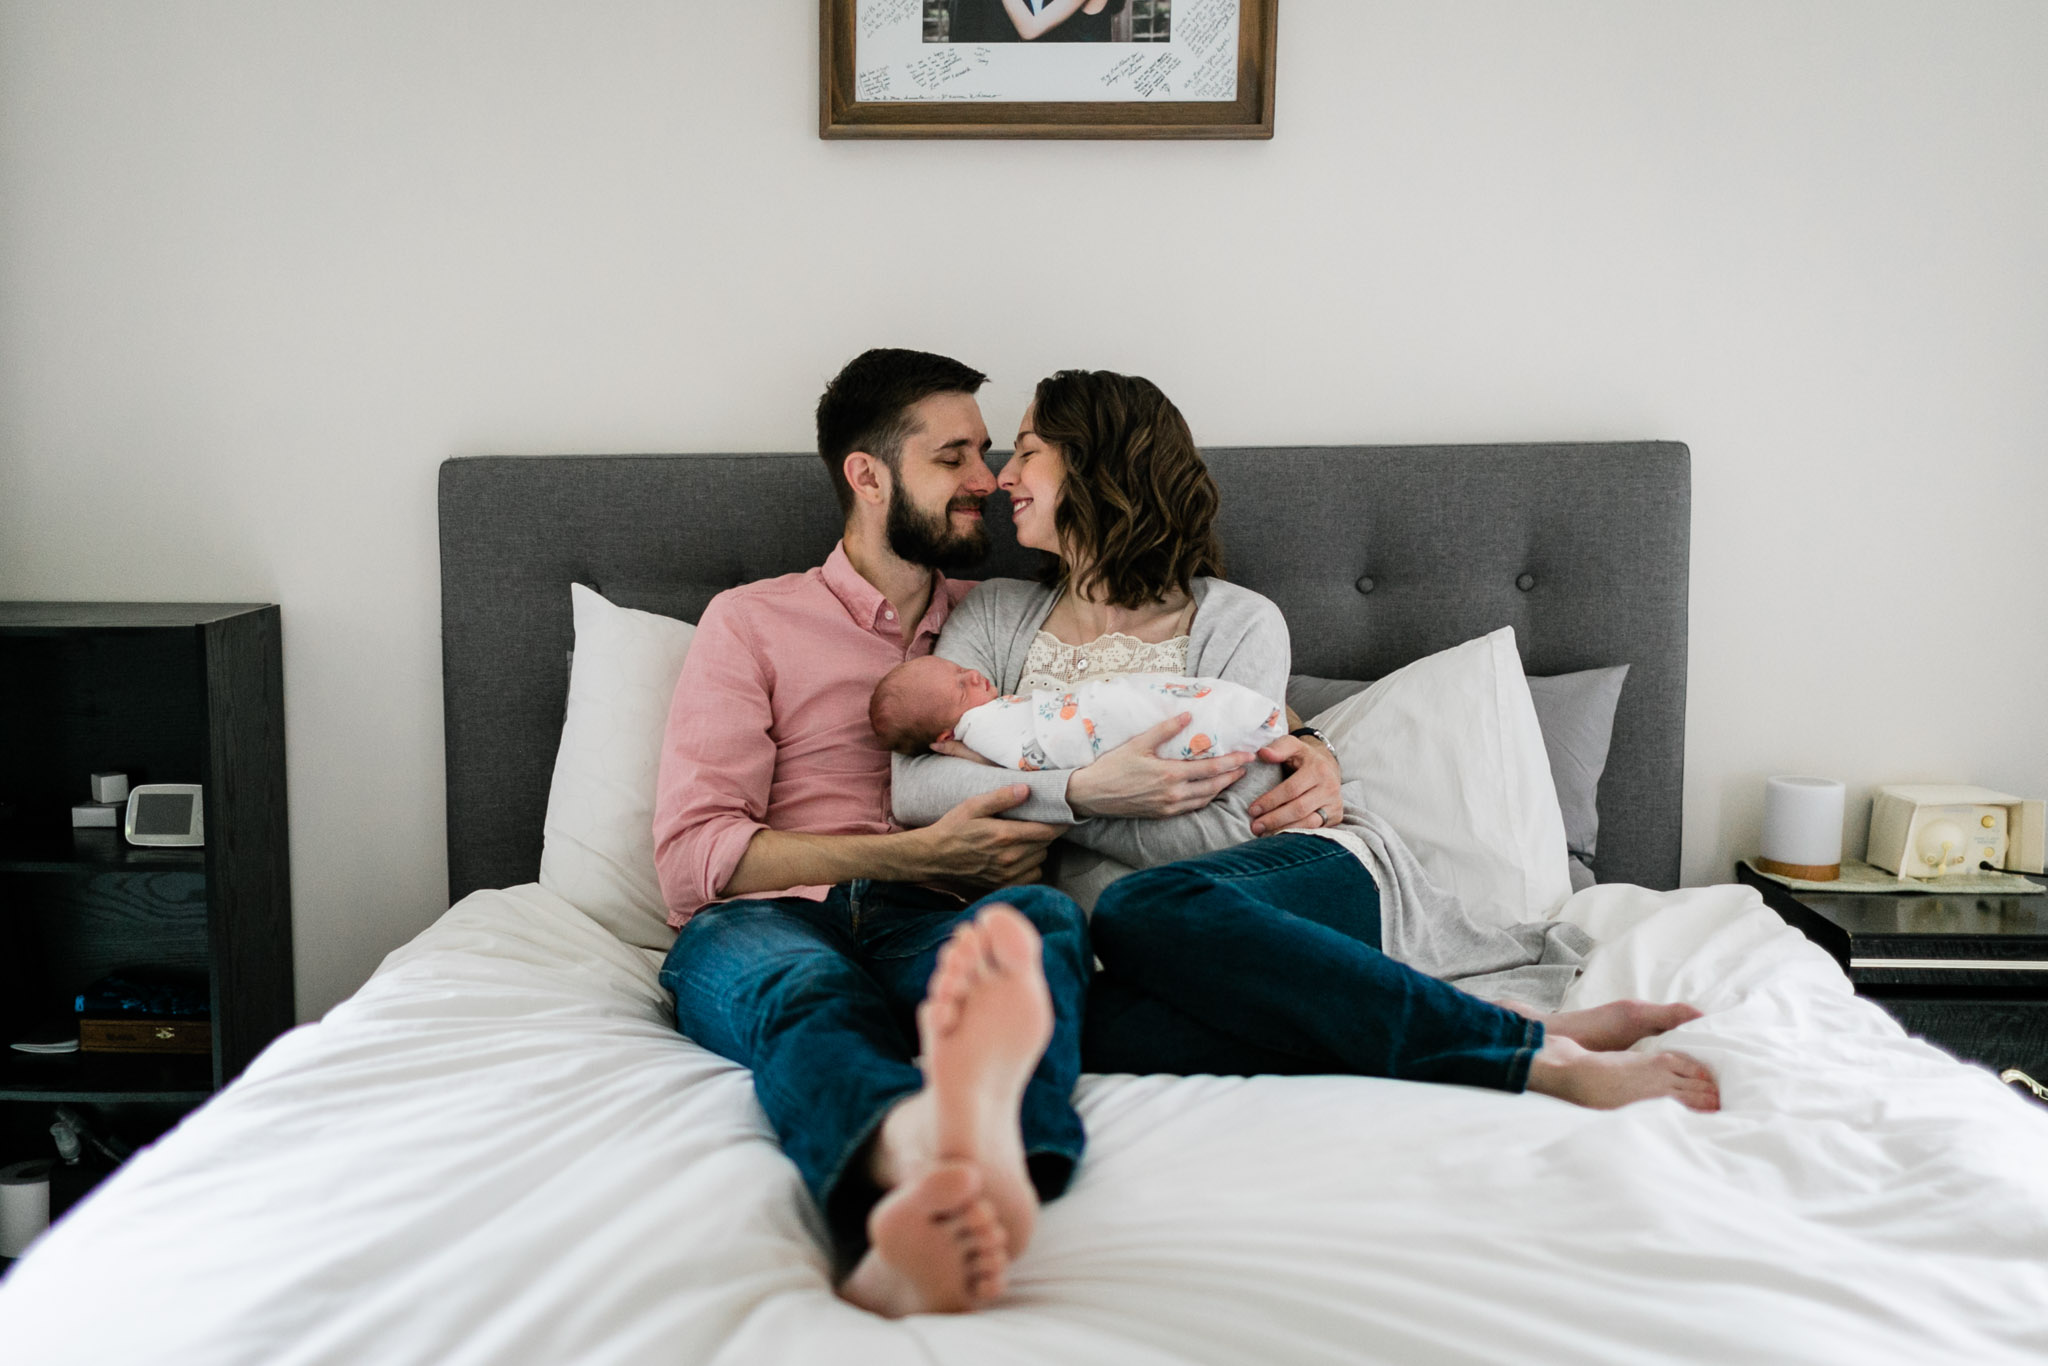 Durham Newborn Photographer | By G. Lin Photography | Parents sitting on bed and holding baby smiling